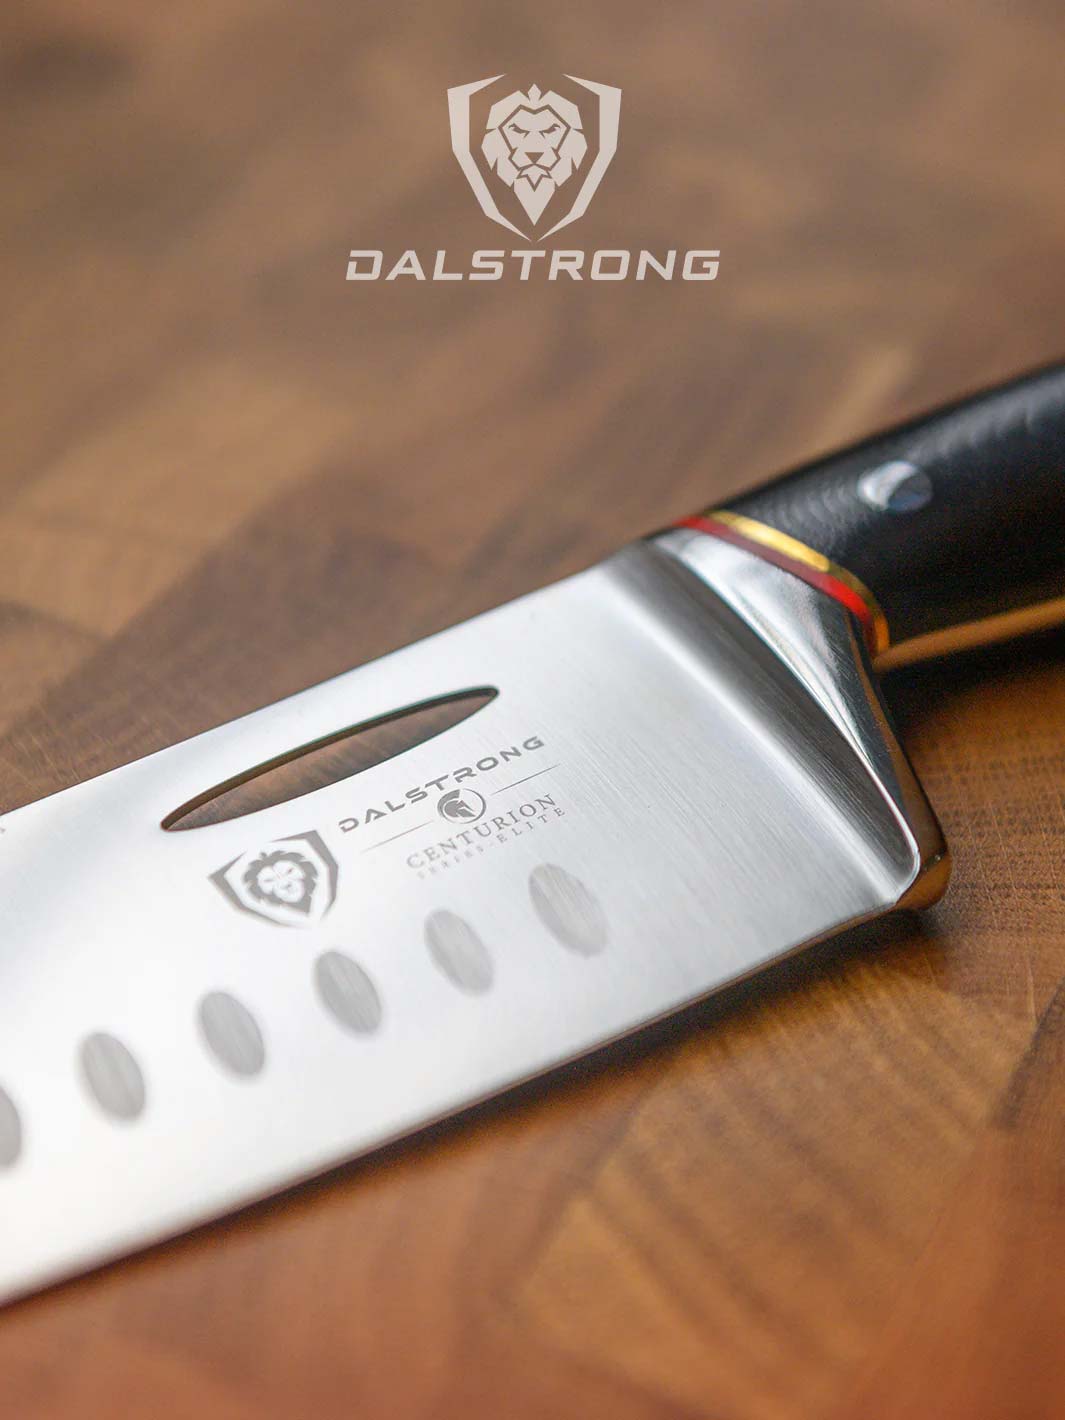 Dalstrong centurion series 7 inch santoku knife with black handle on a cutting board.